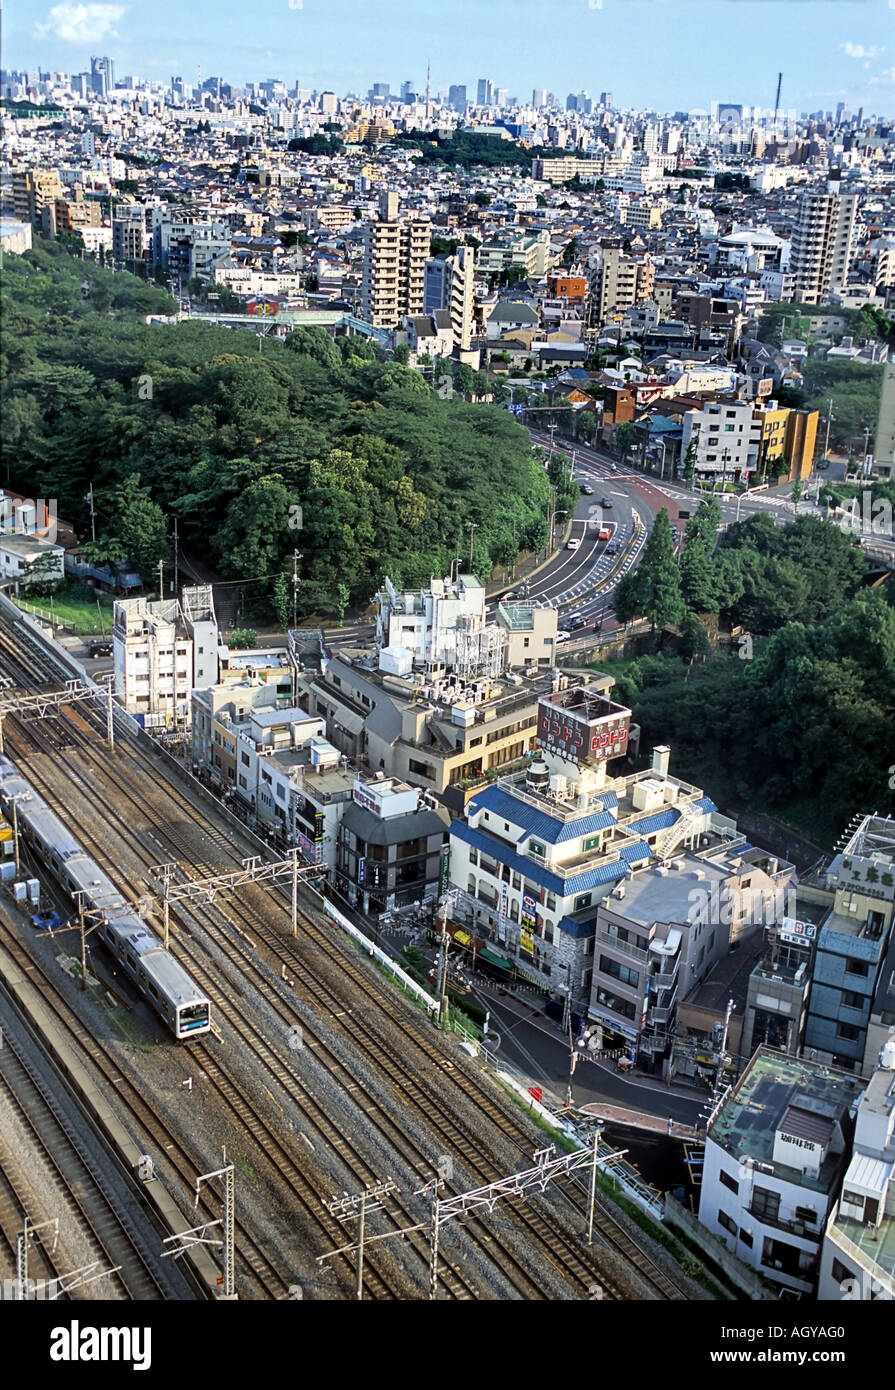 View of railroads and urban landscape of Tokyo Japan Stock Photo